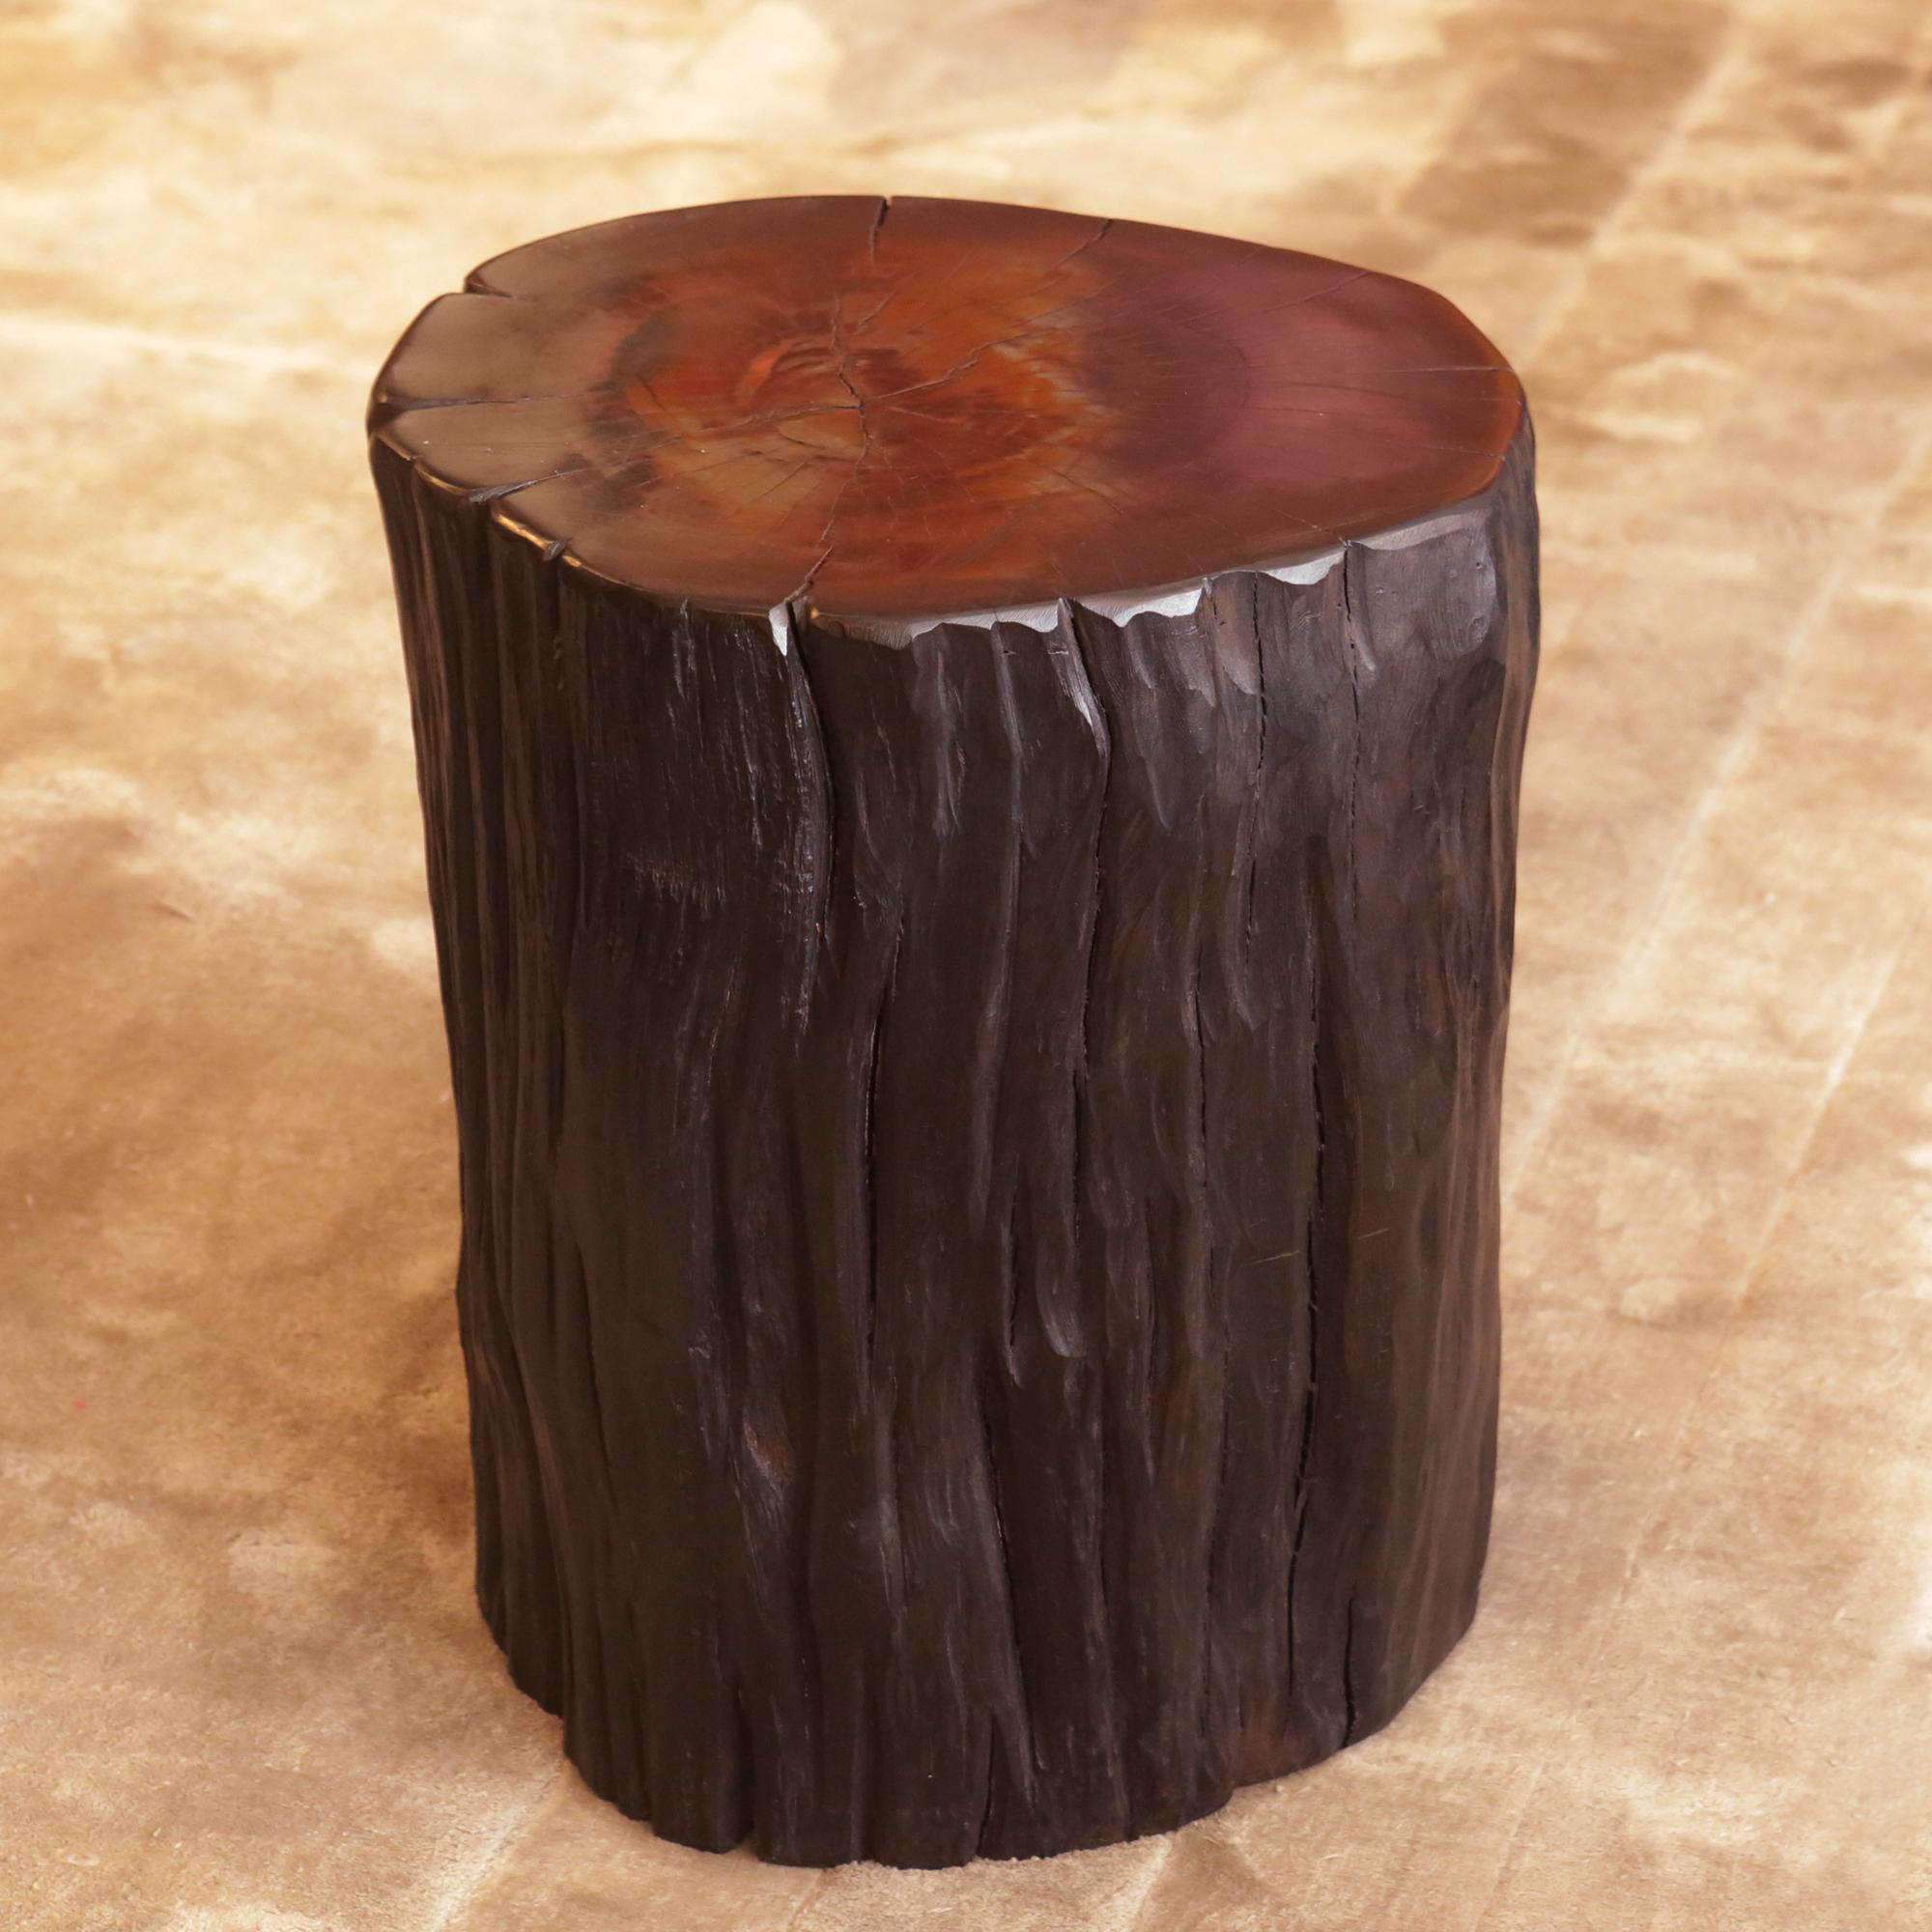 Stool Bony A and B Set of 2 in natural
solid walnut wood.
Hand carved piece, unique and
exceptional piece.